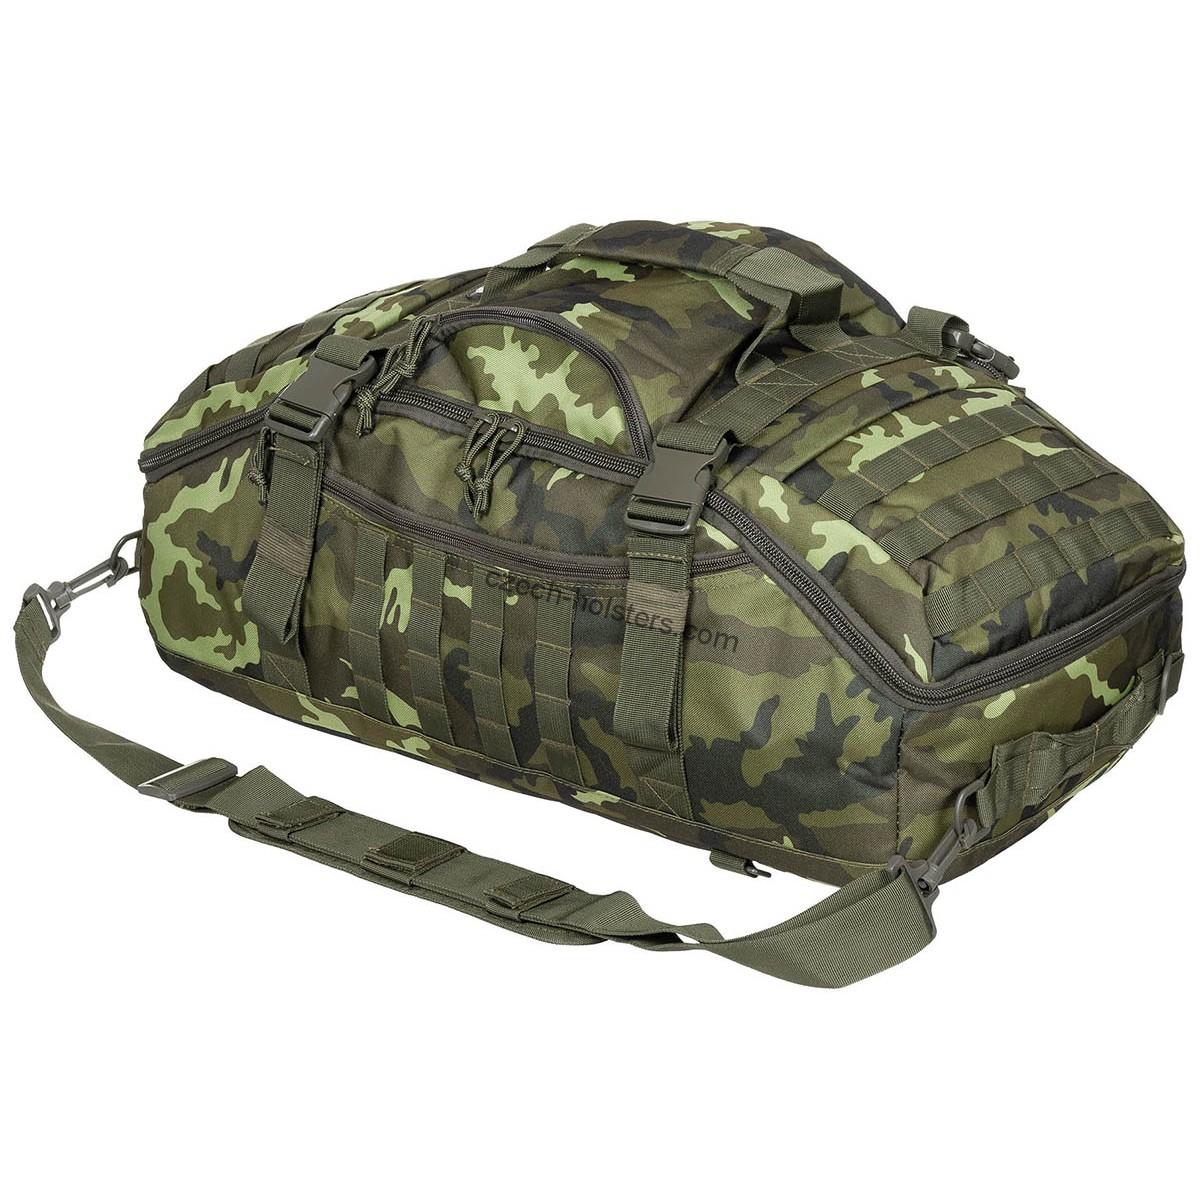 MFH® Tactical Shooters Range Transport Travel Bag 48L - M95 Czech Army Camo